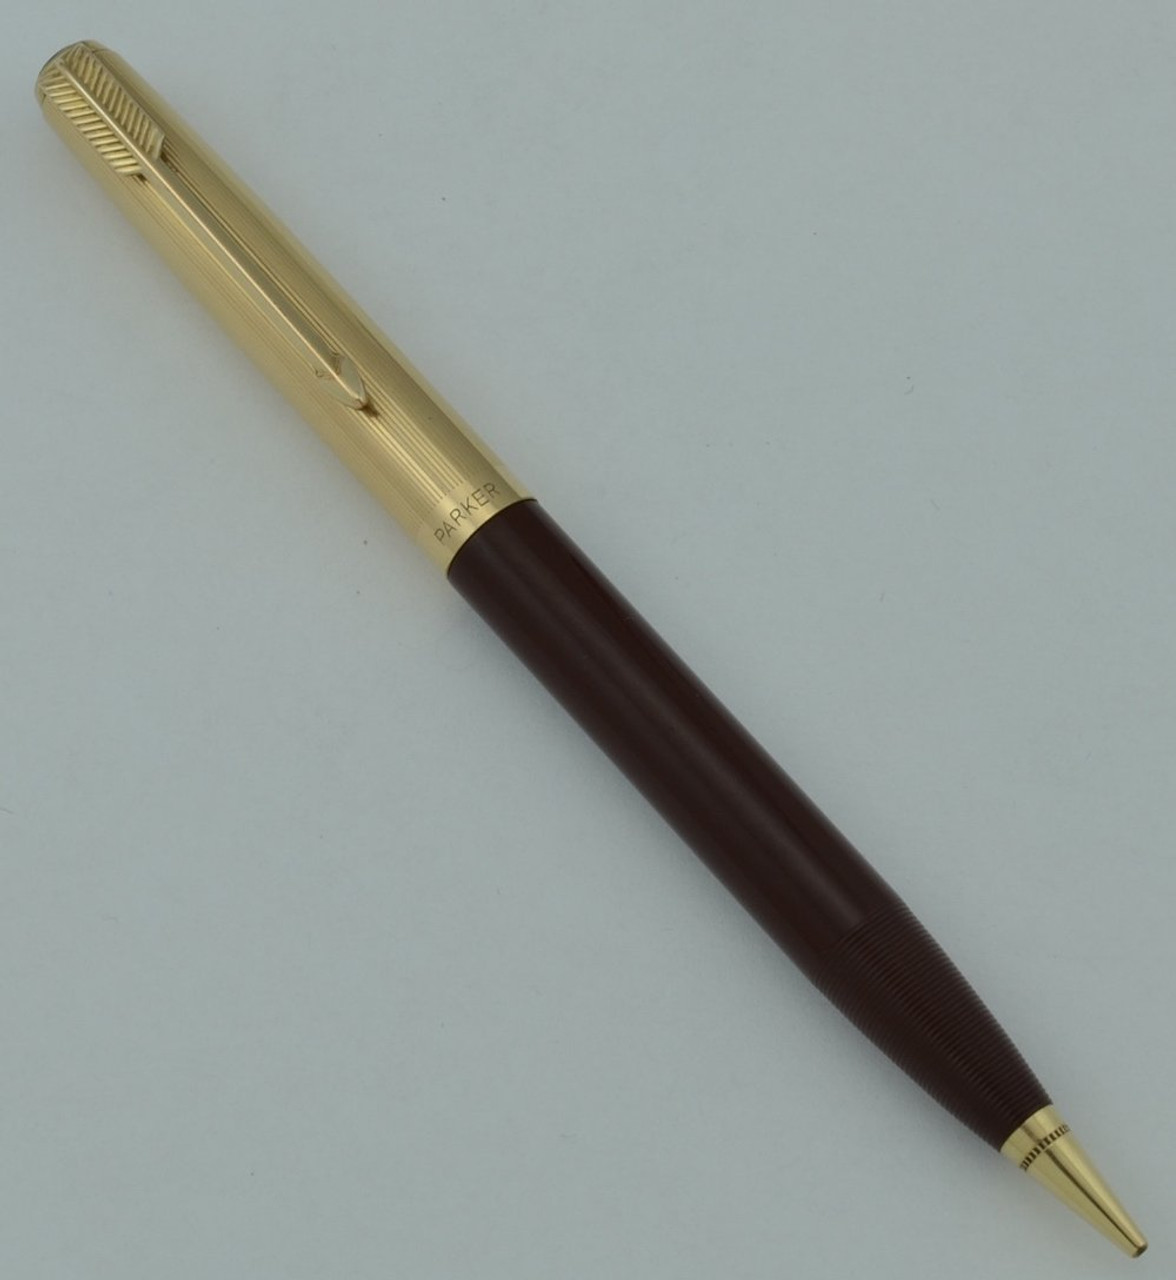 Parker 51 Mechanical Pencil - Black, Gold Filled Cap (Excellent, Works Well, Personalized)